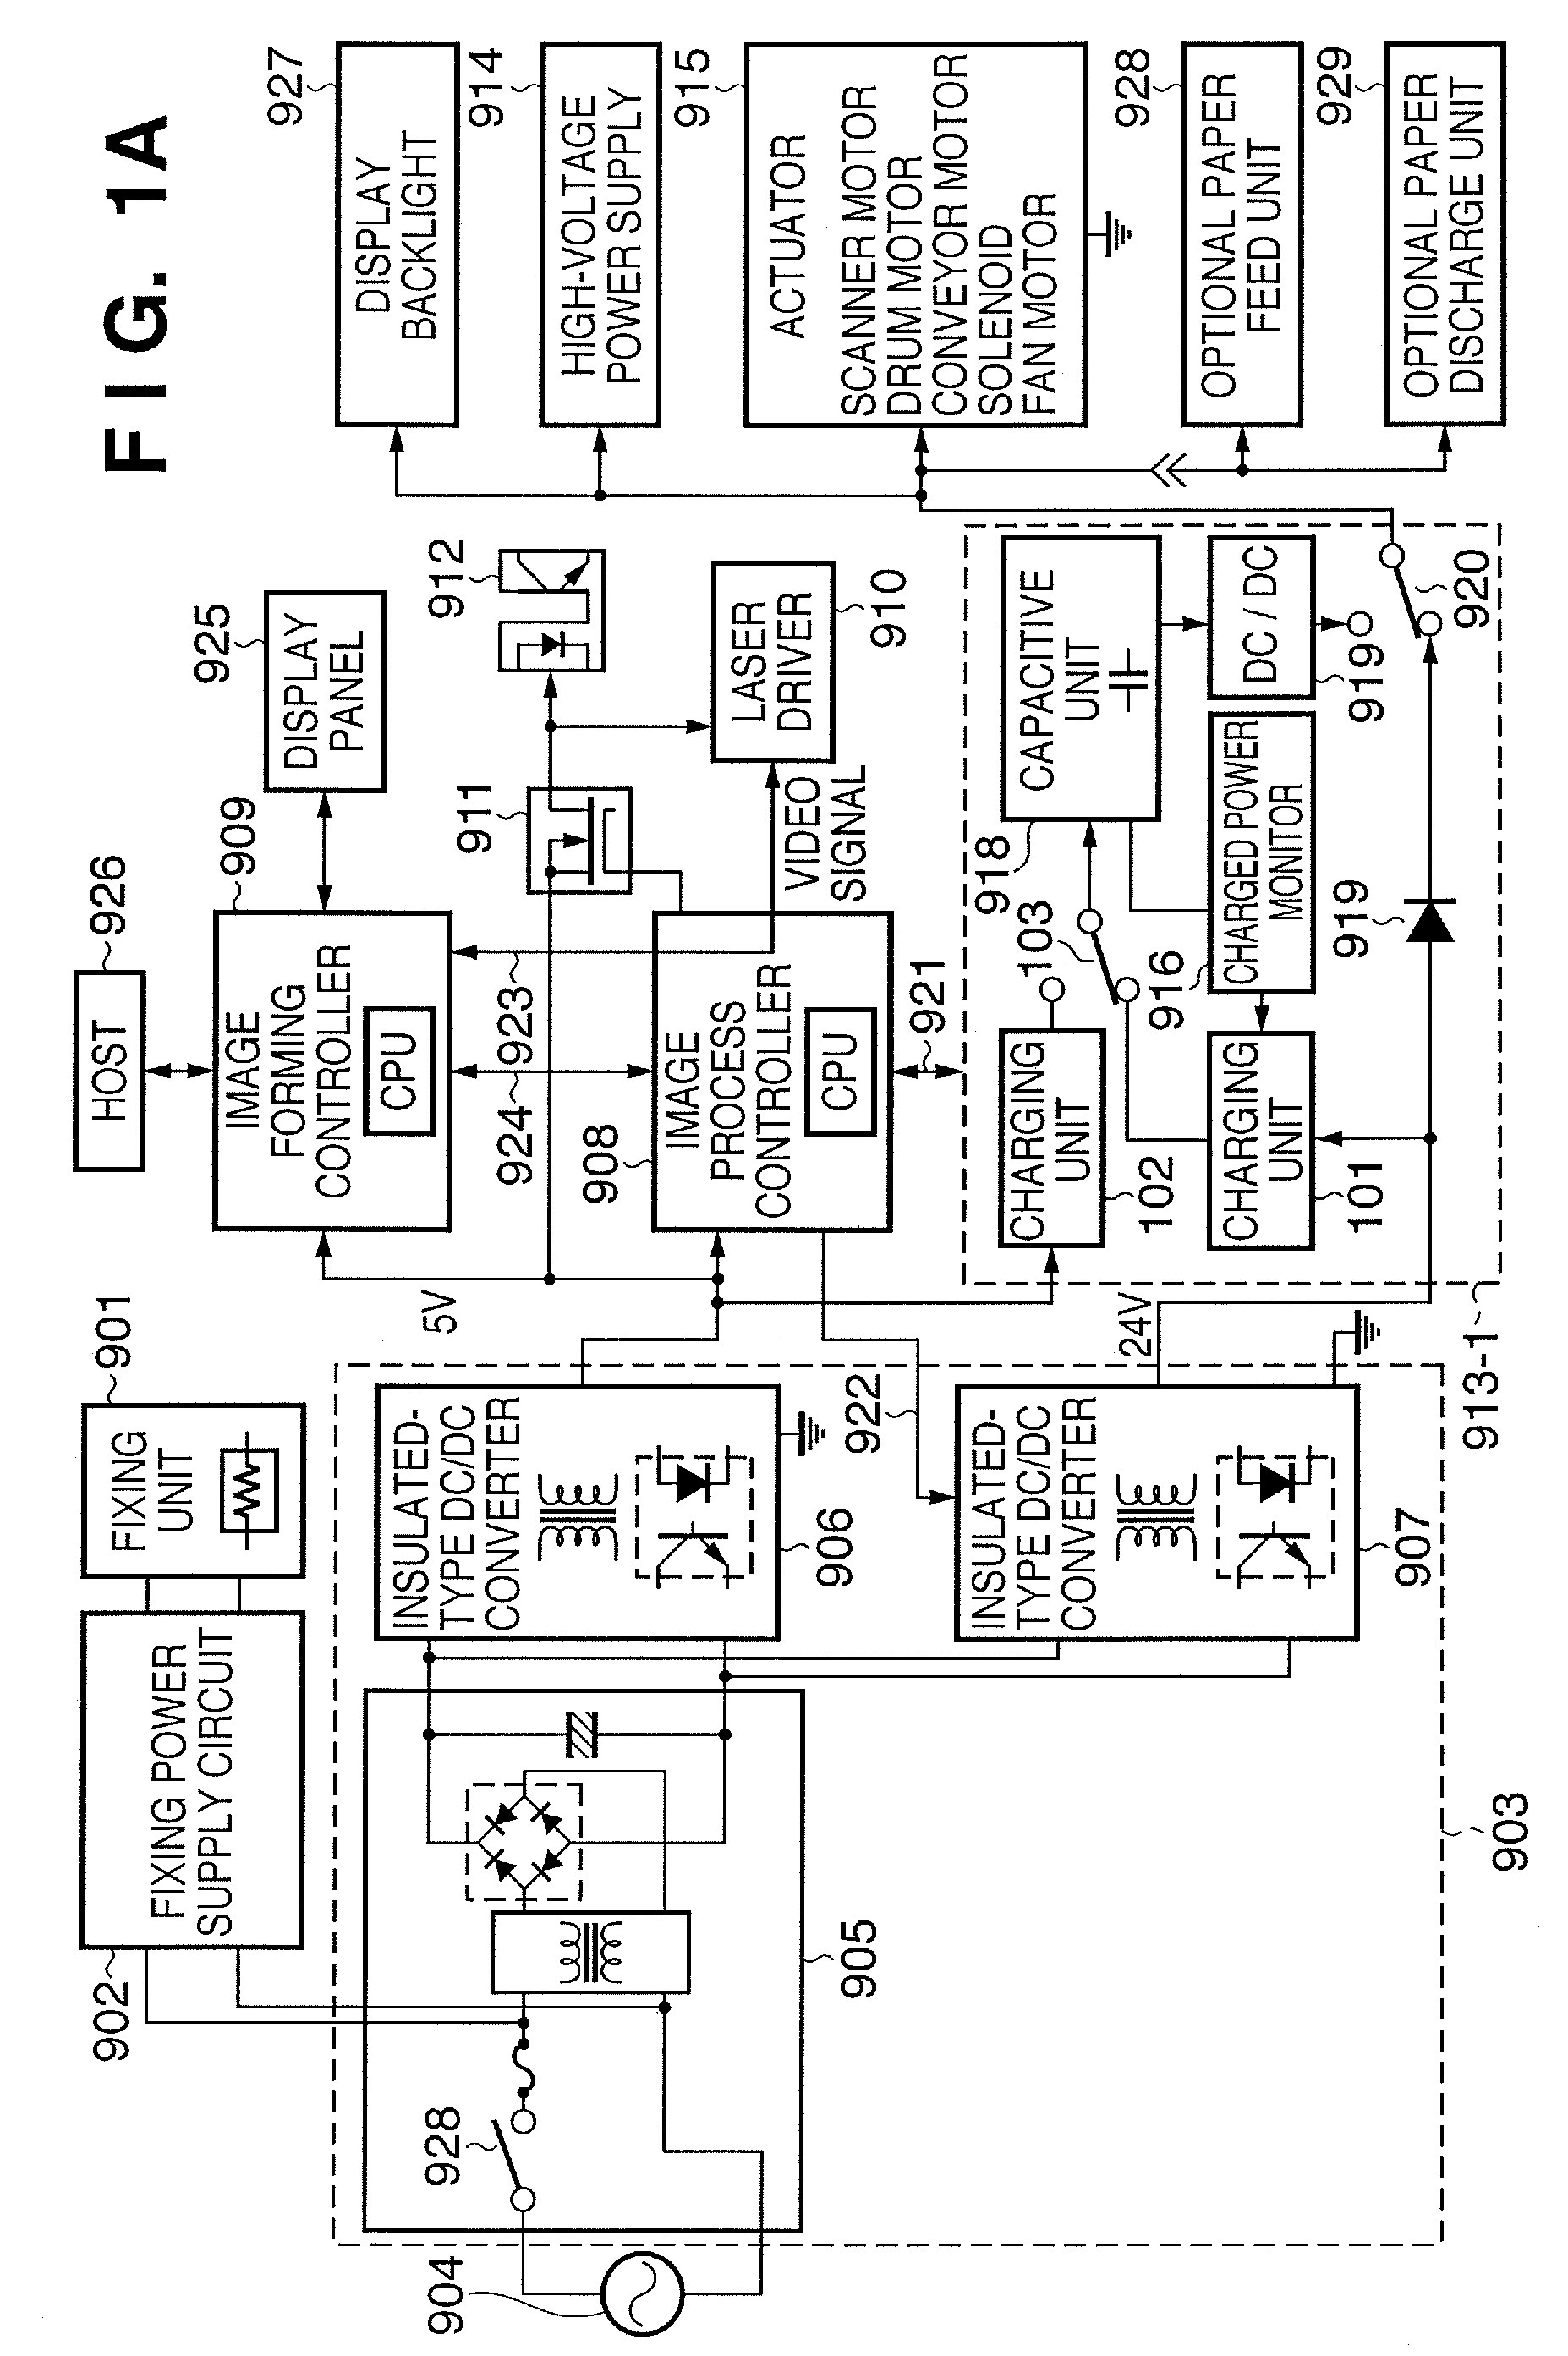 Image forming apparatus and method with charge switching to effect power supply control